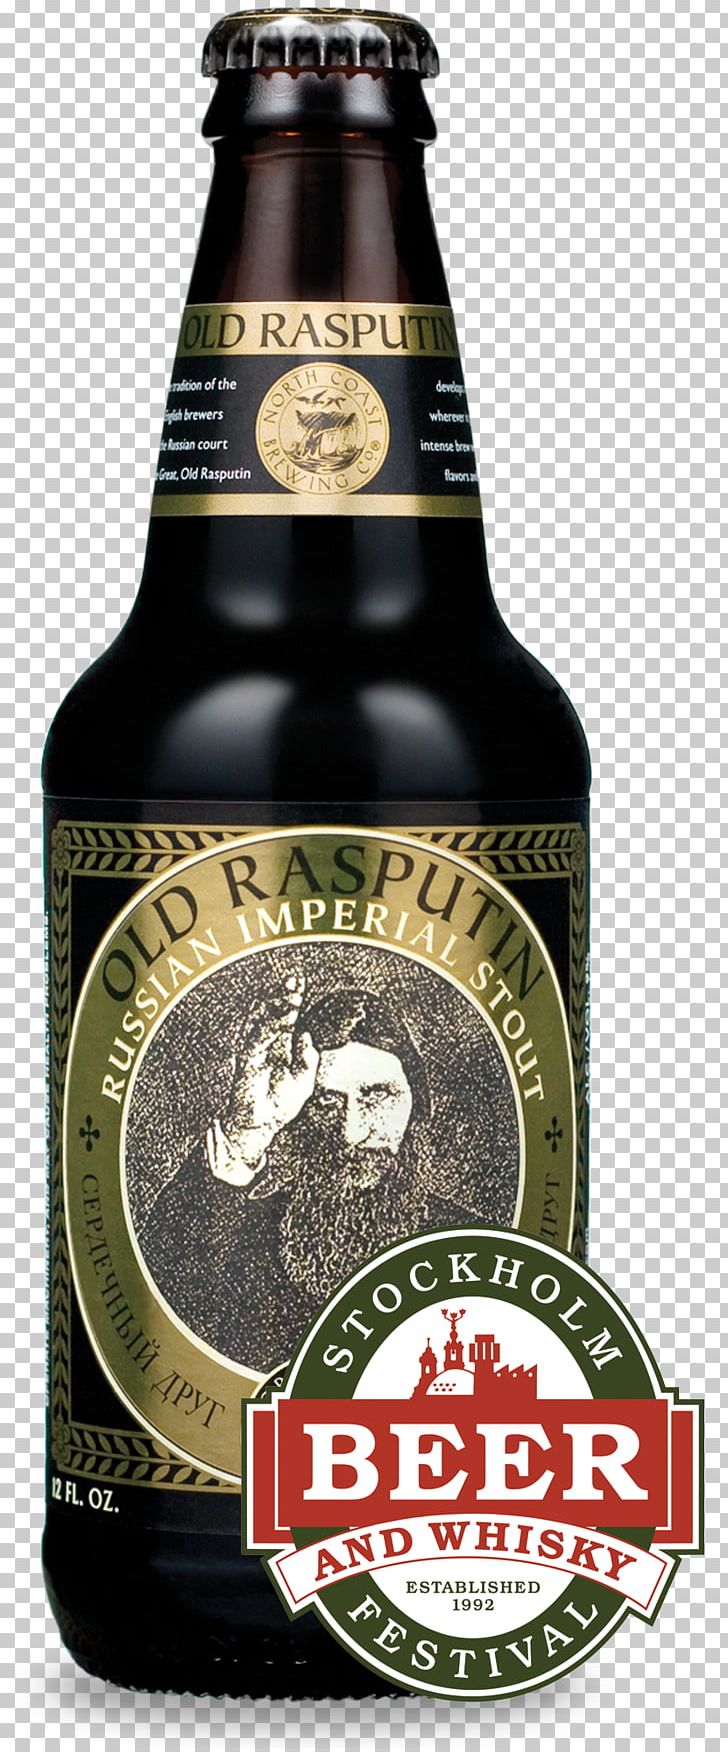 North Coast Brewing Company Old Rasputin Russian Imperial Stout Beer Ale PNG, Clipart, Alcoholic Drink, Ale, Beer, Beer Bottle, Bottle Free PNG Download